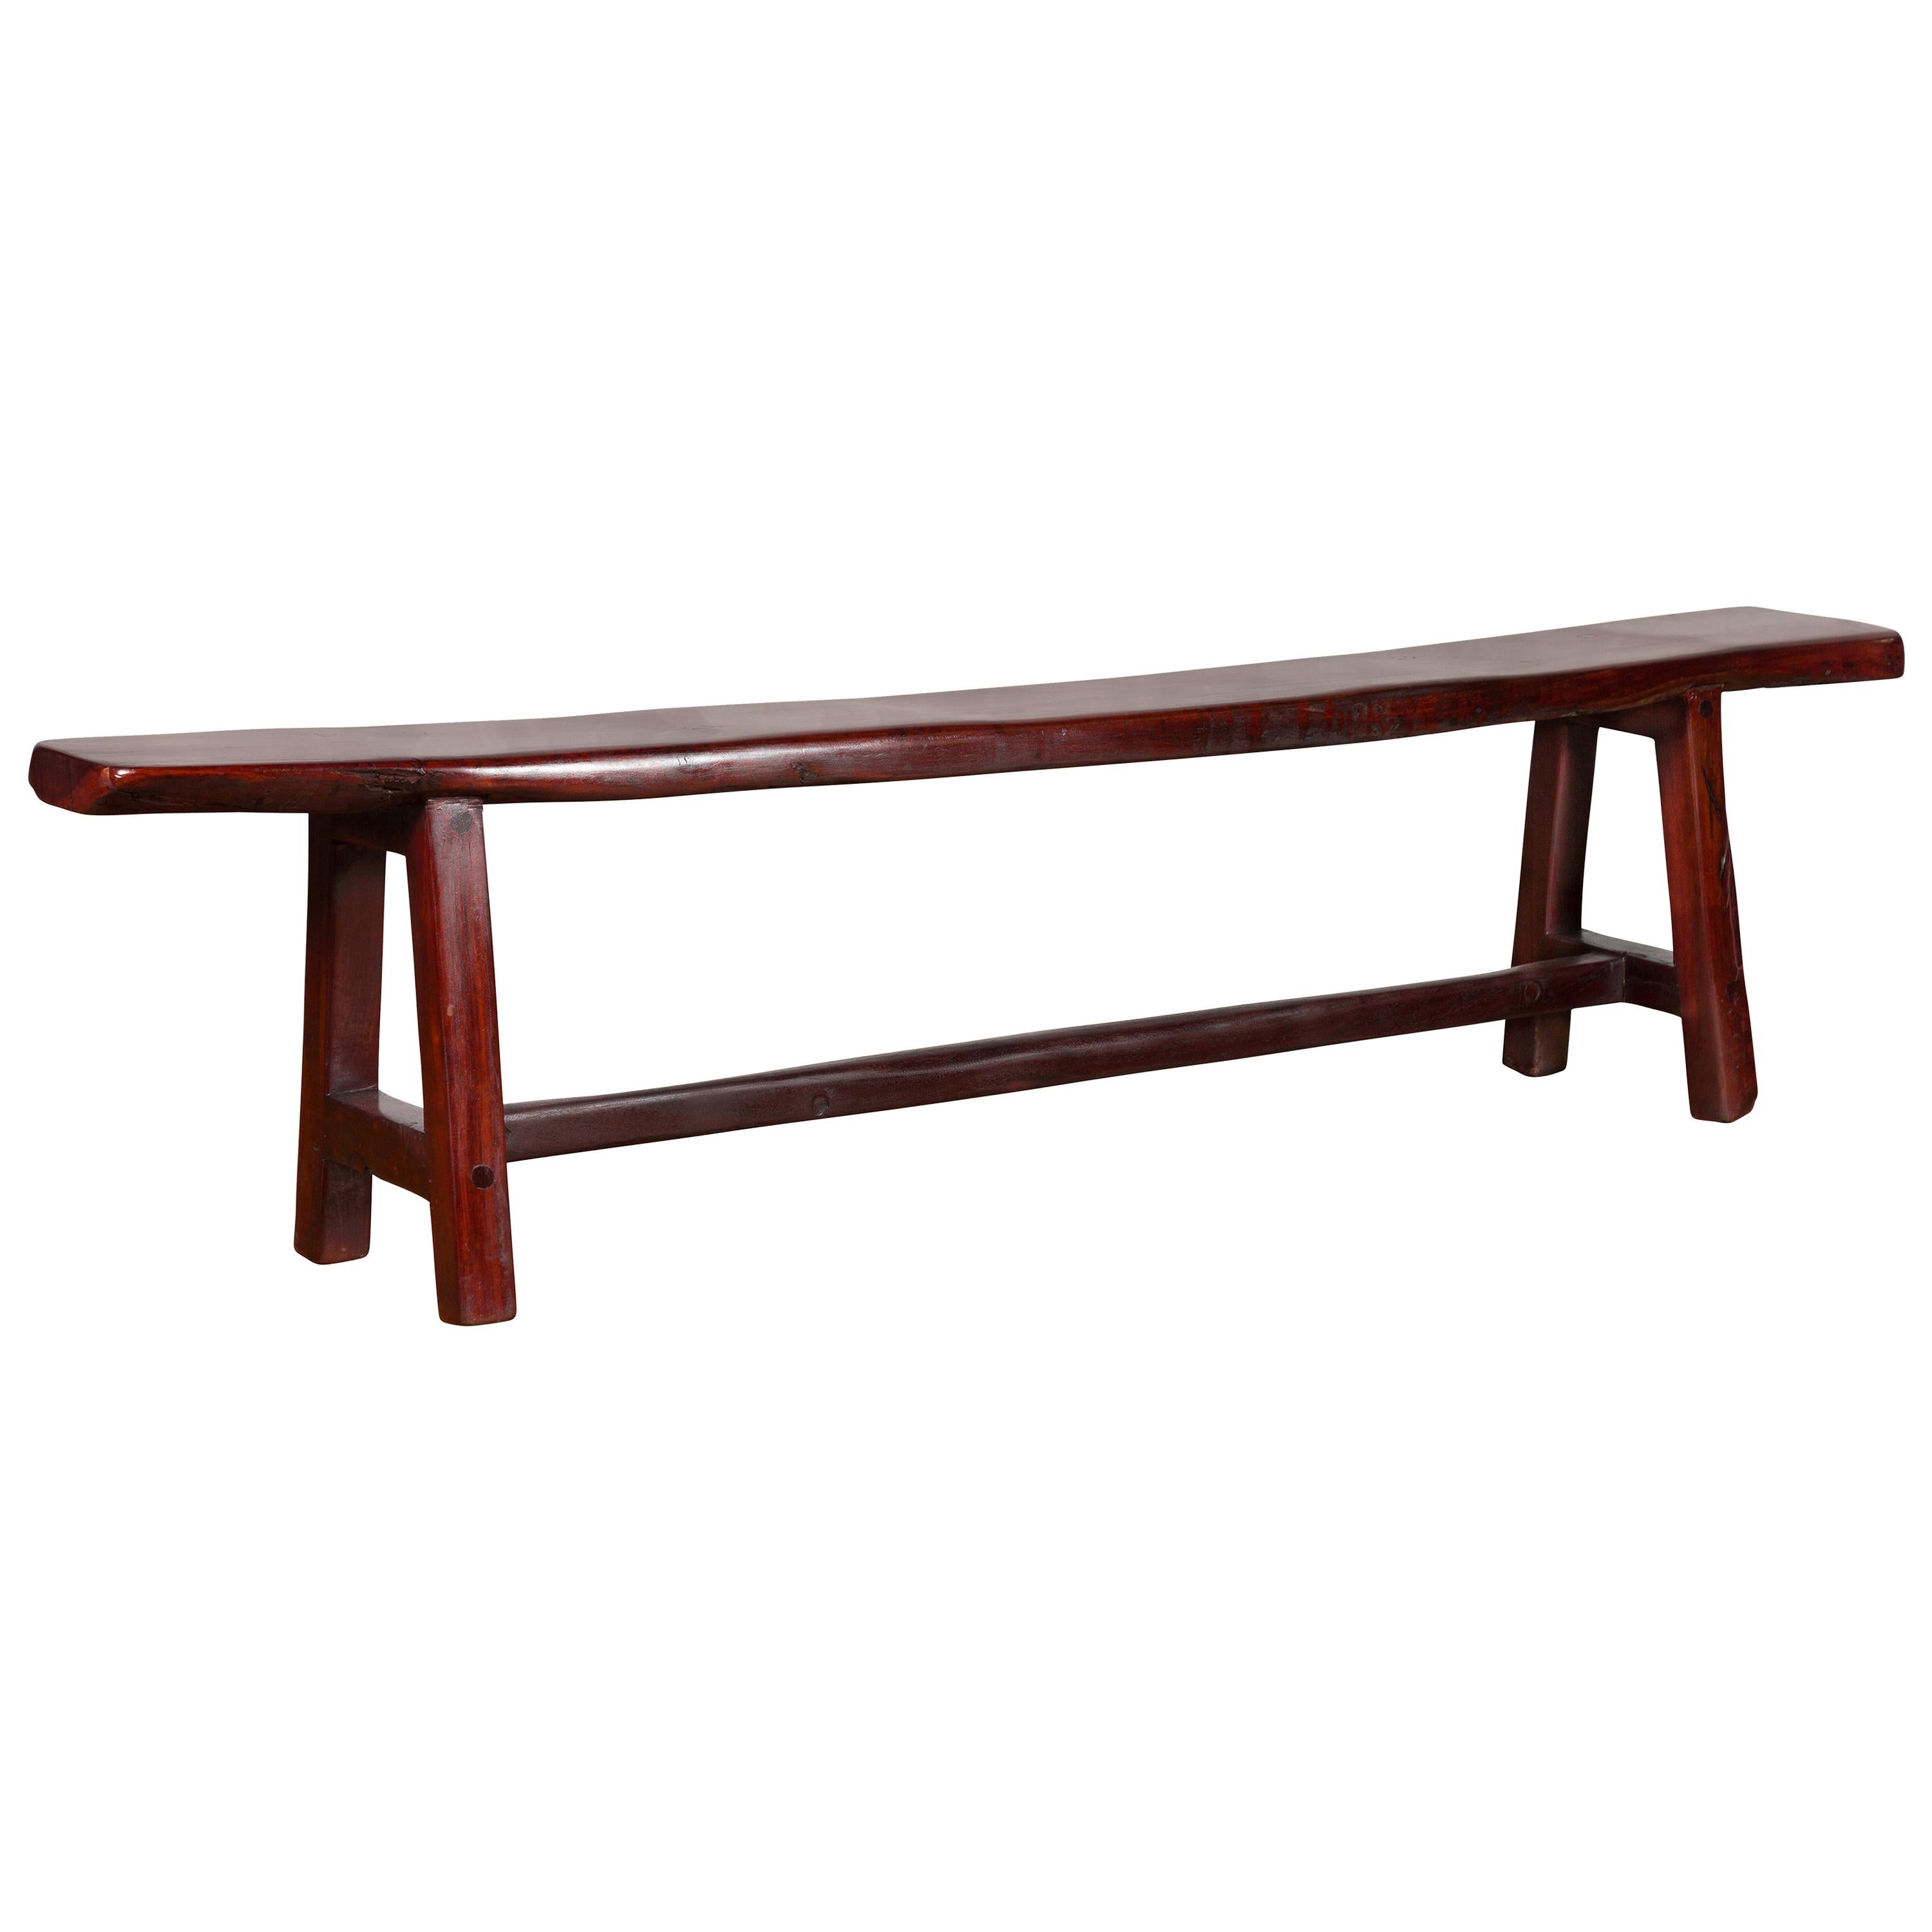 Vintage Javanese A-Frame Rustic Bench with Dark Patina and Cross Stretcher